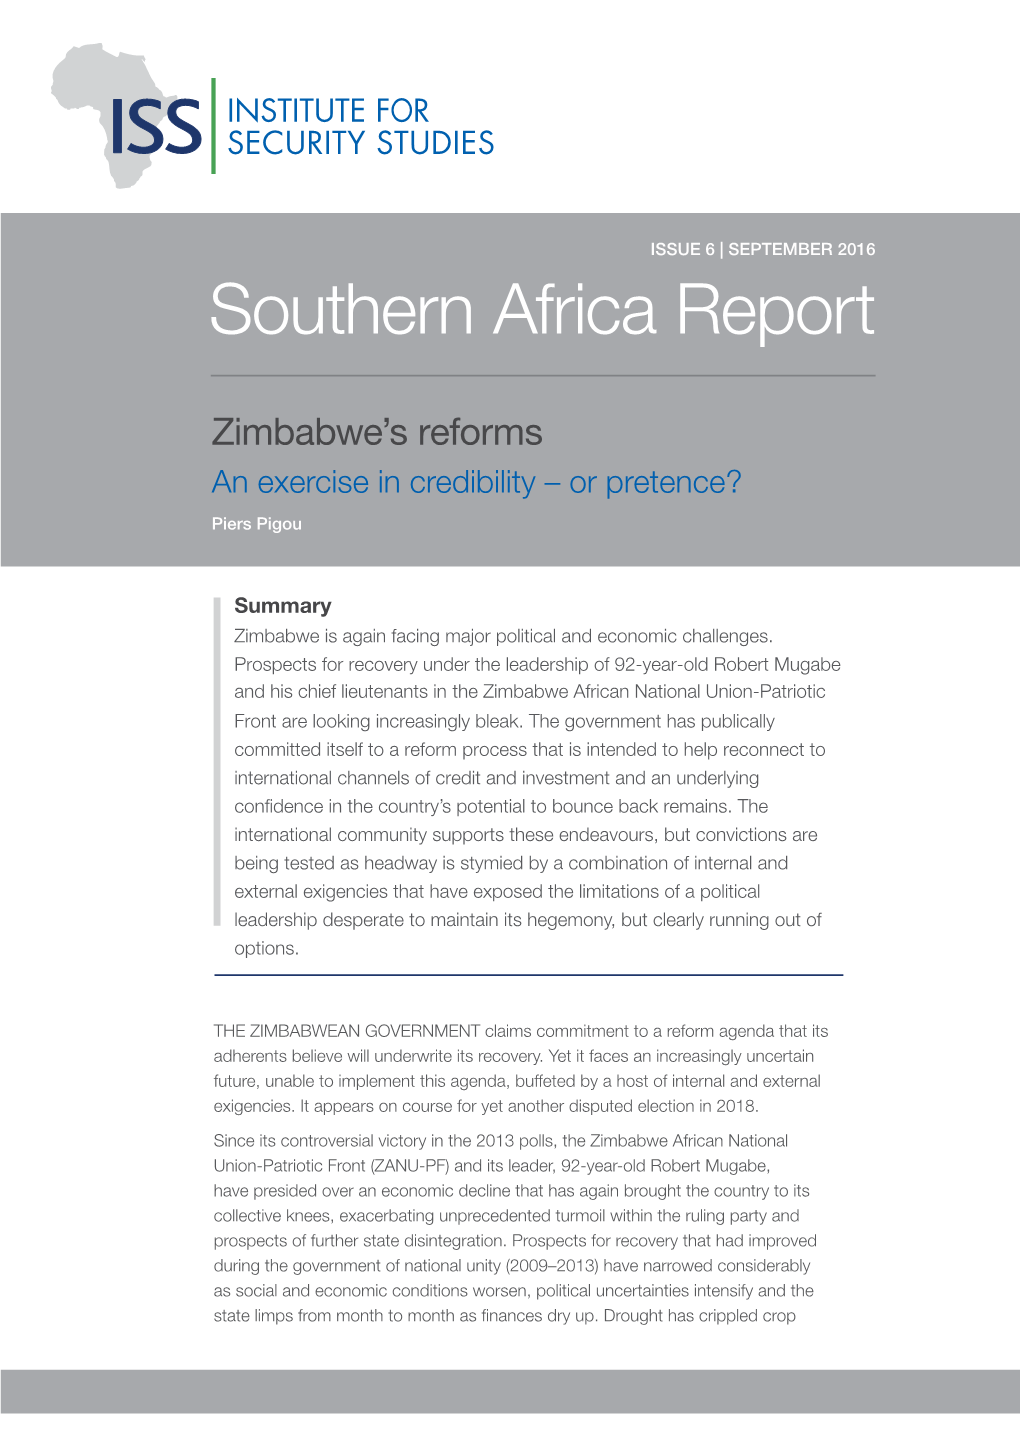 Zimbabwe's Reforms: an Exercise in Credibility